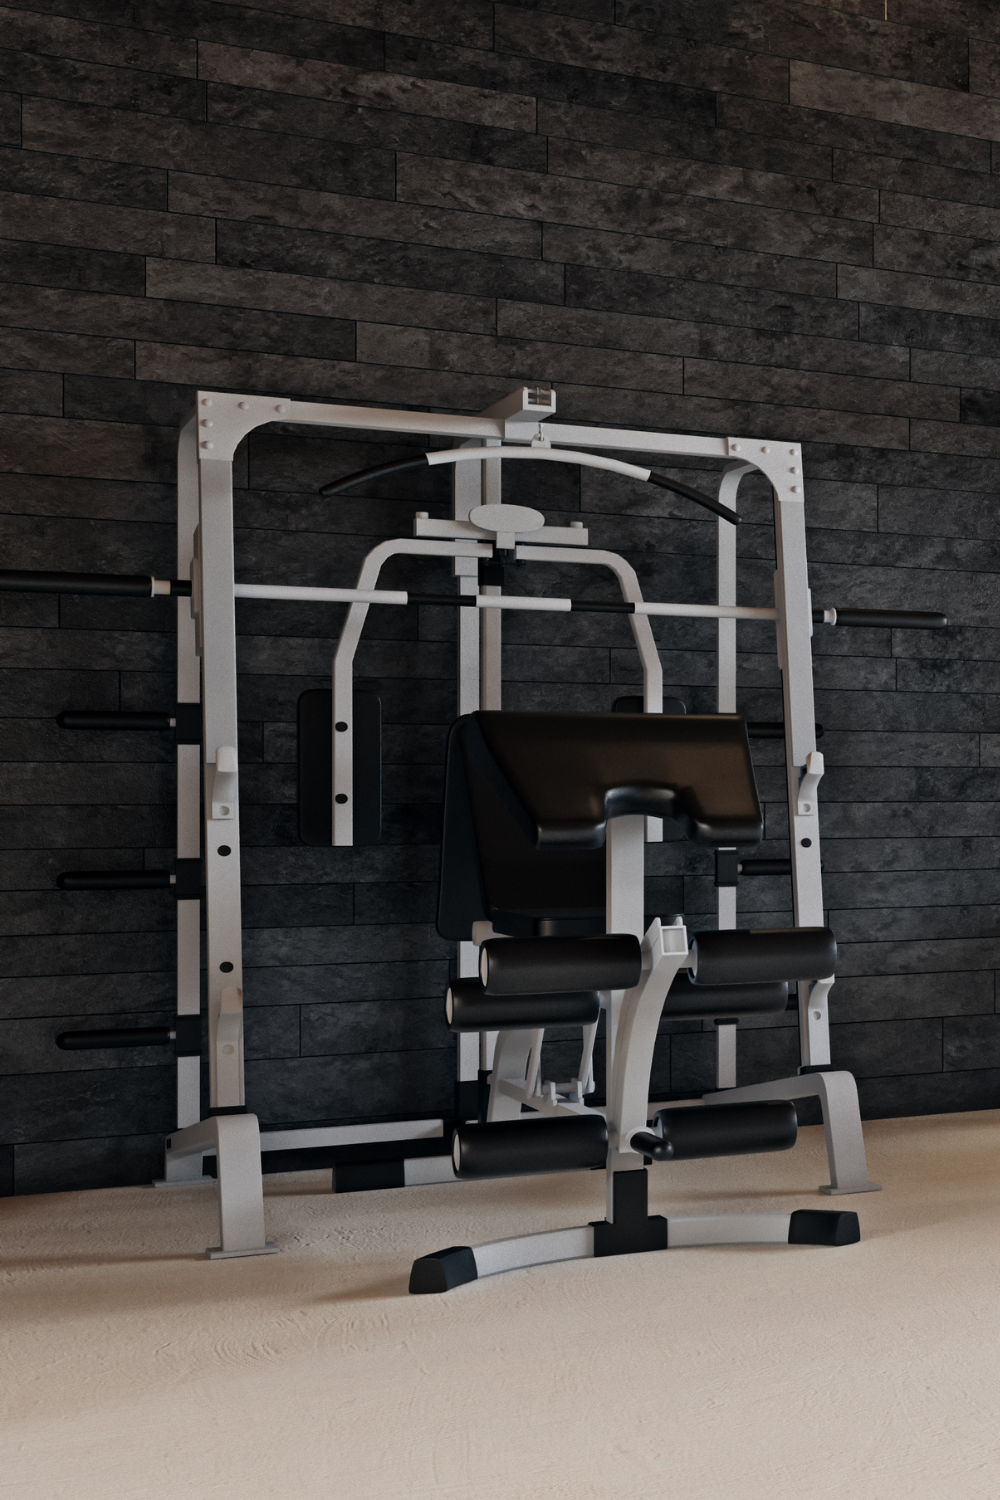 How to Create the Perfect Home Gym